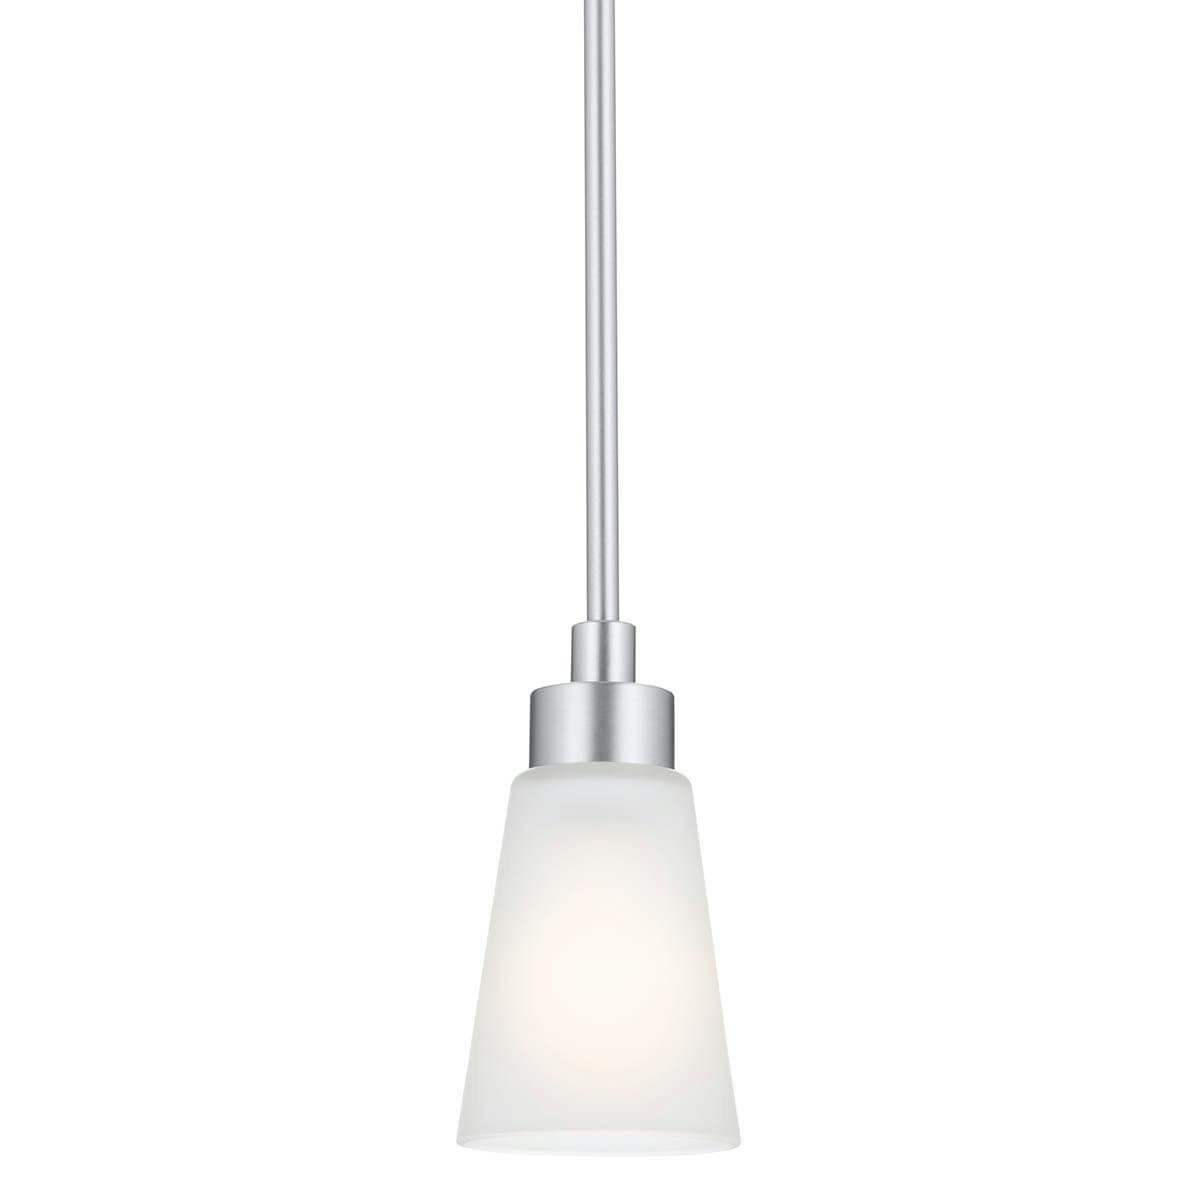 Erma 4.25" Mini Pendant Brushed Nickel without the canopy on a white background